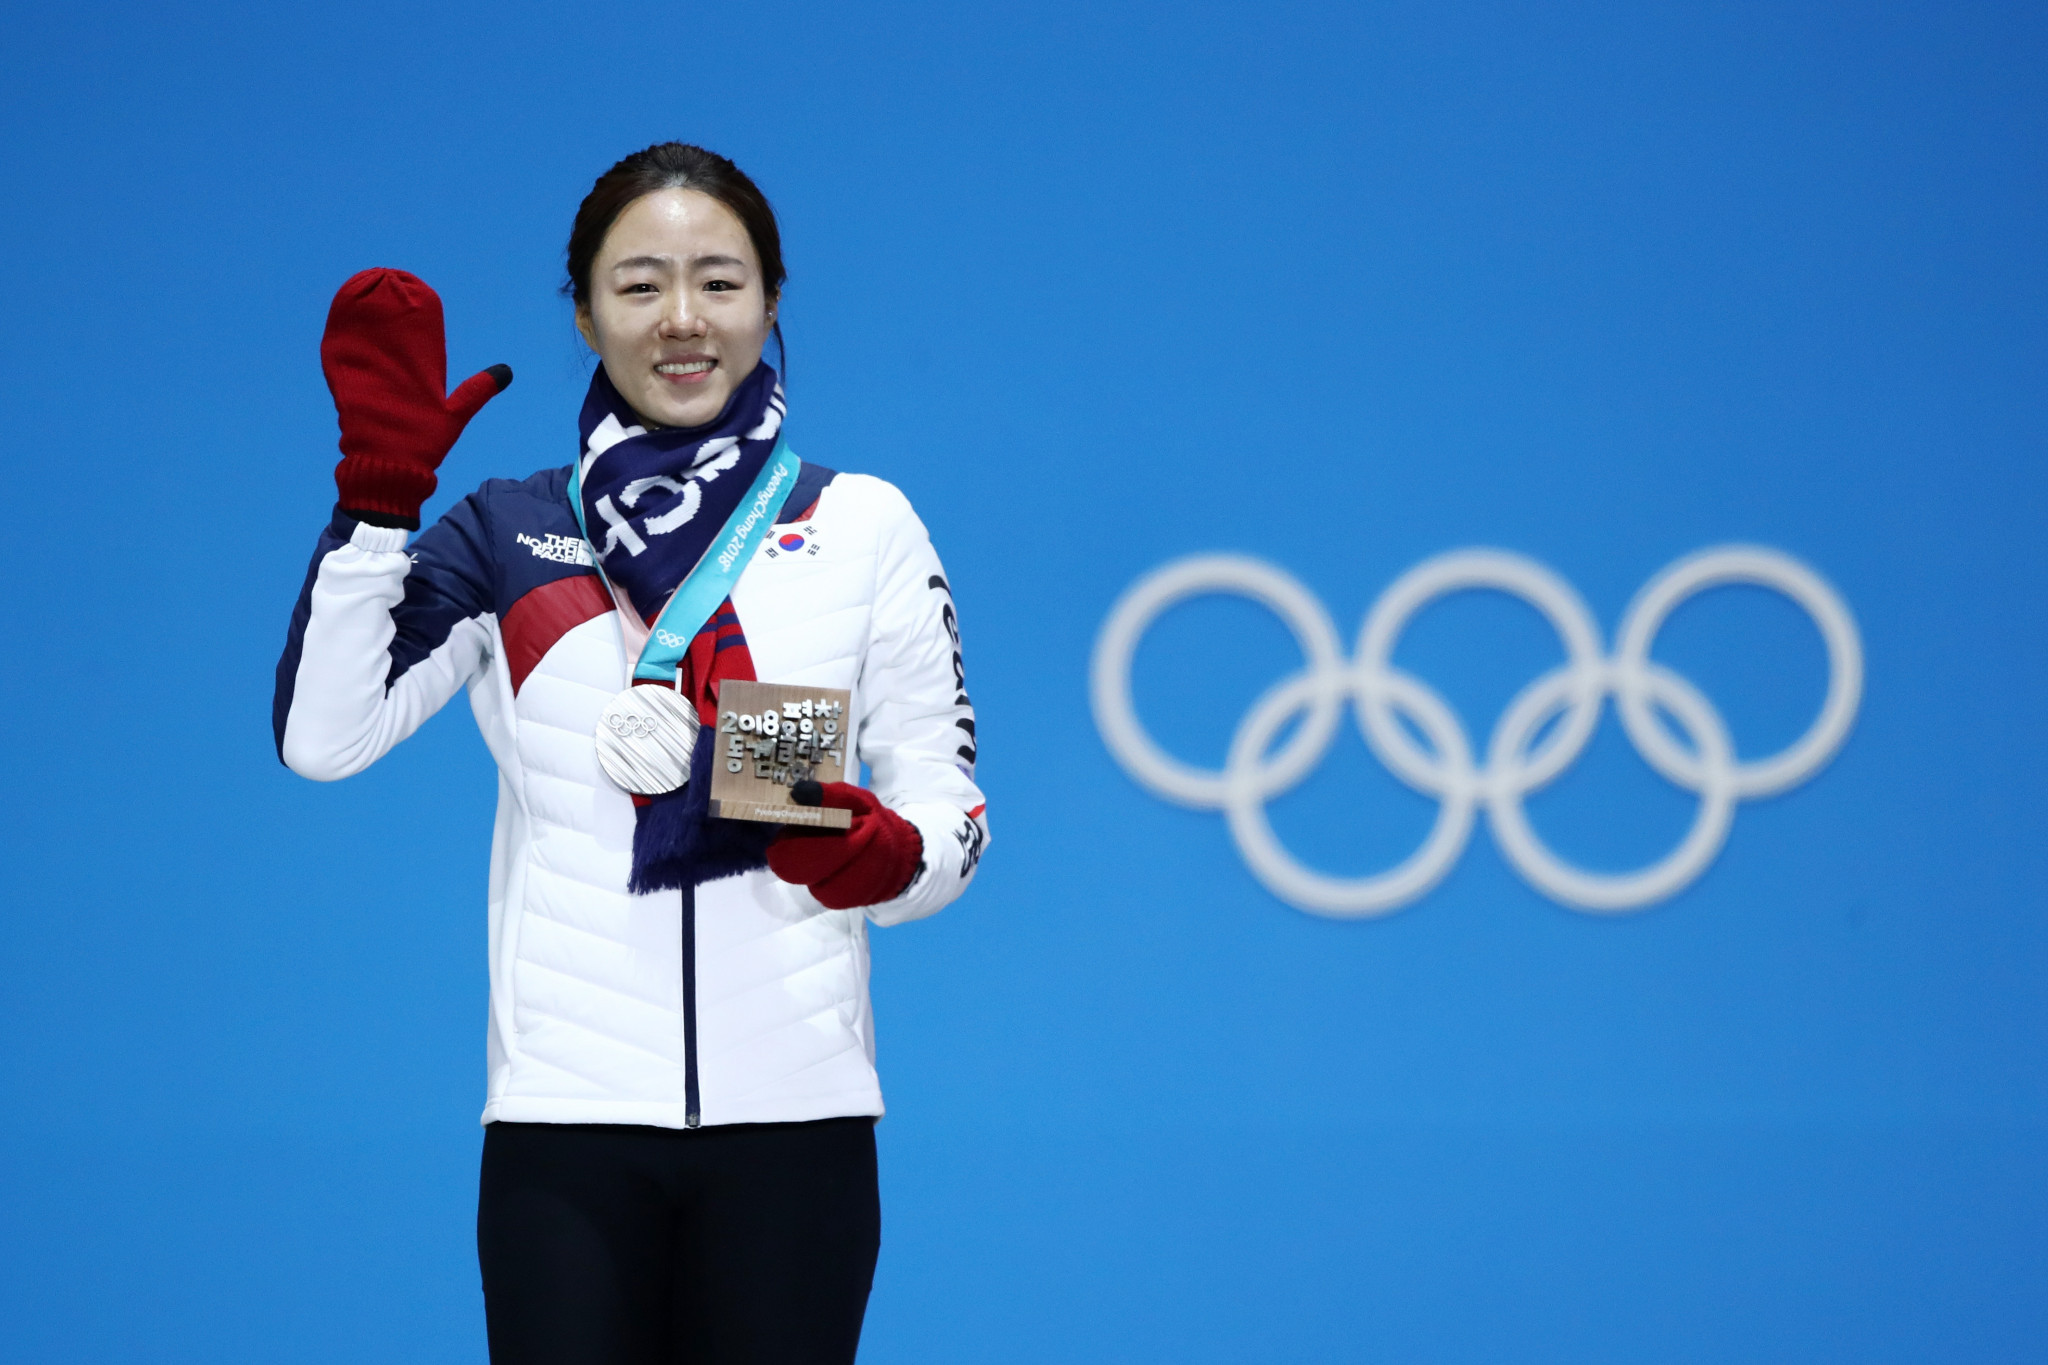 South Korea's Lee Sang-hwa took silver at the Pyeongchang 2018 Winter Olympics, having already won two golds at previous editions ©Getty Images